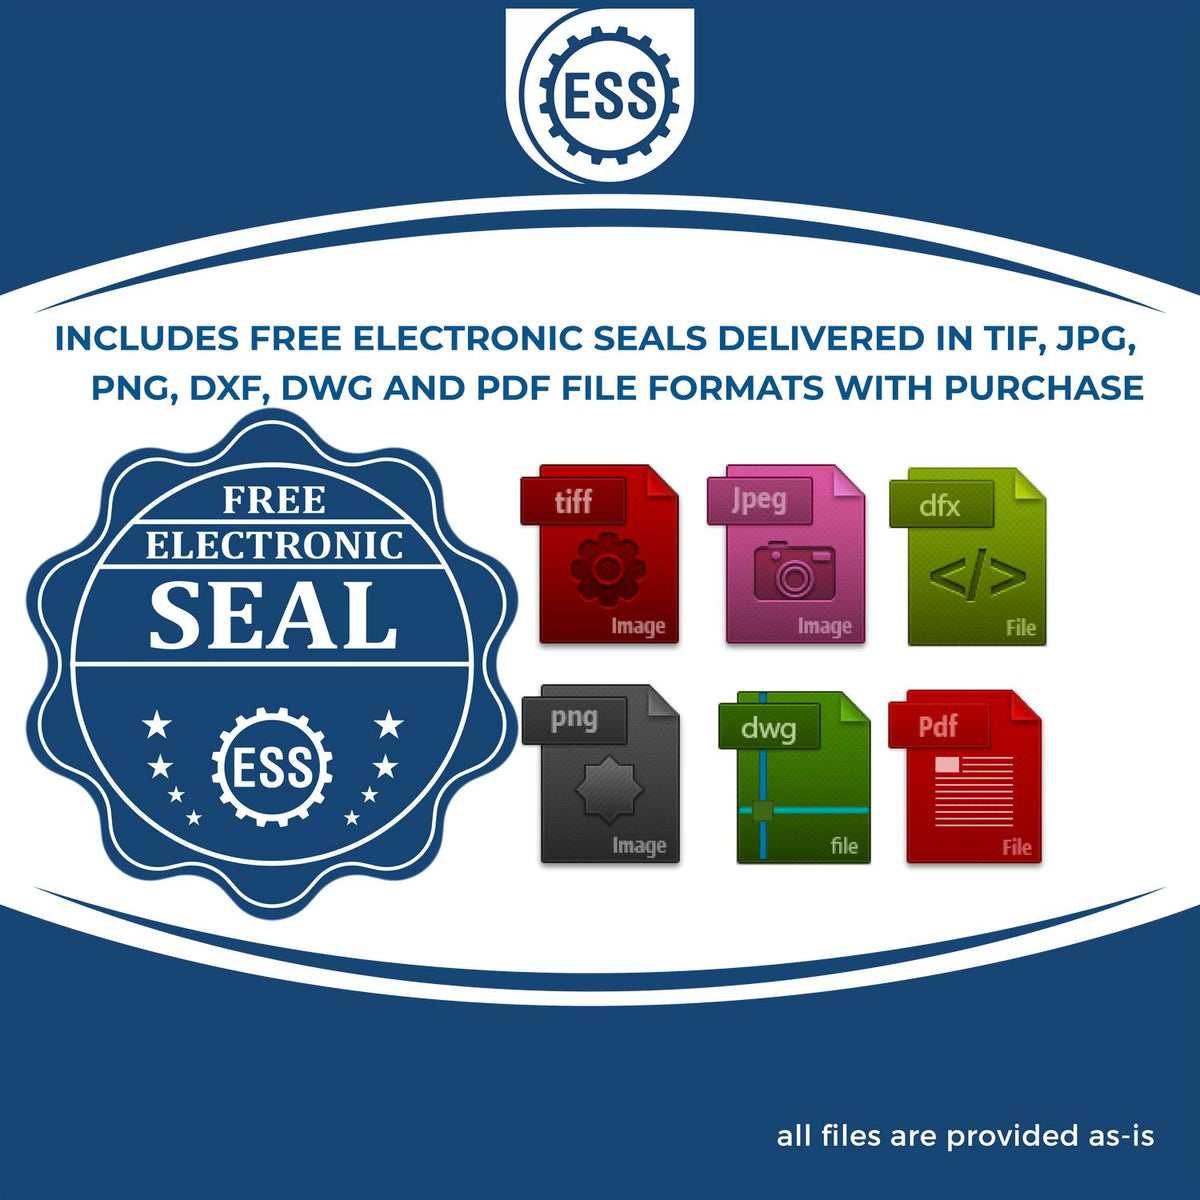 An infographic for the free electronic seal for the Slim Pre-Inked West Virginia Professional Engineer Seal Stamp illustrating the different file type icons such as DXF, DWG, TIF, JPG and PNG.